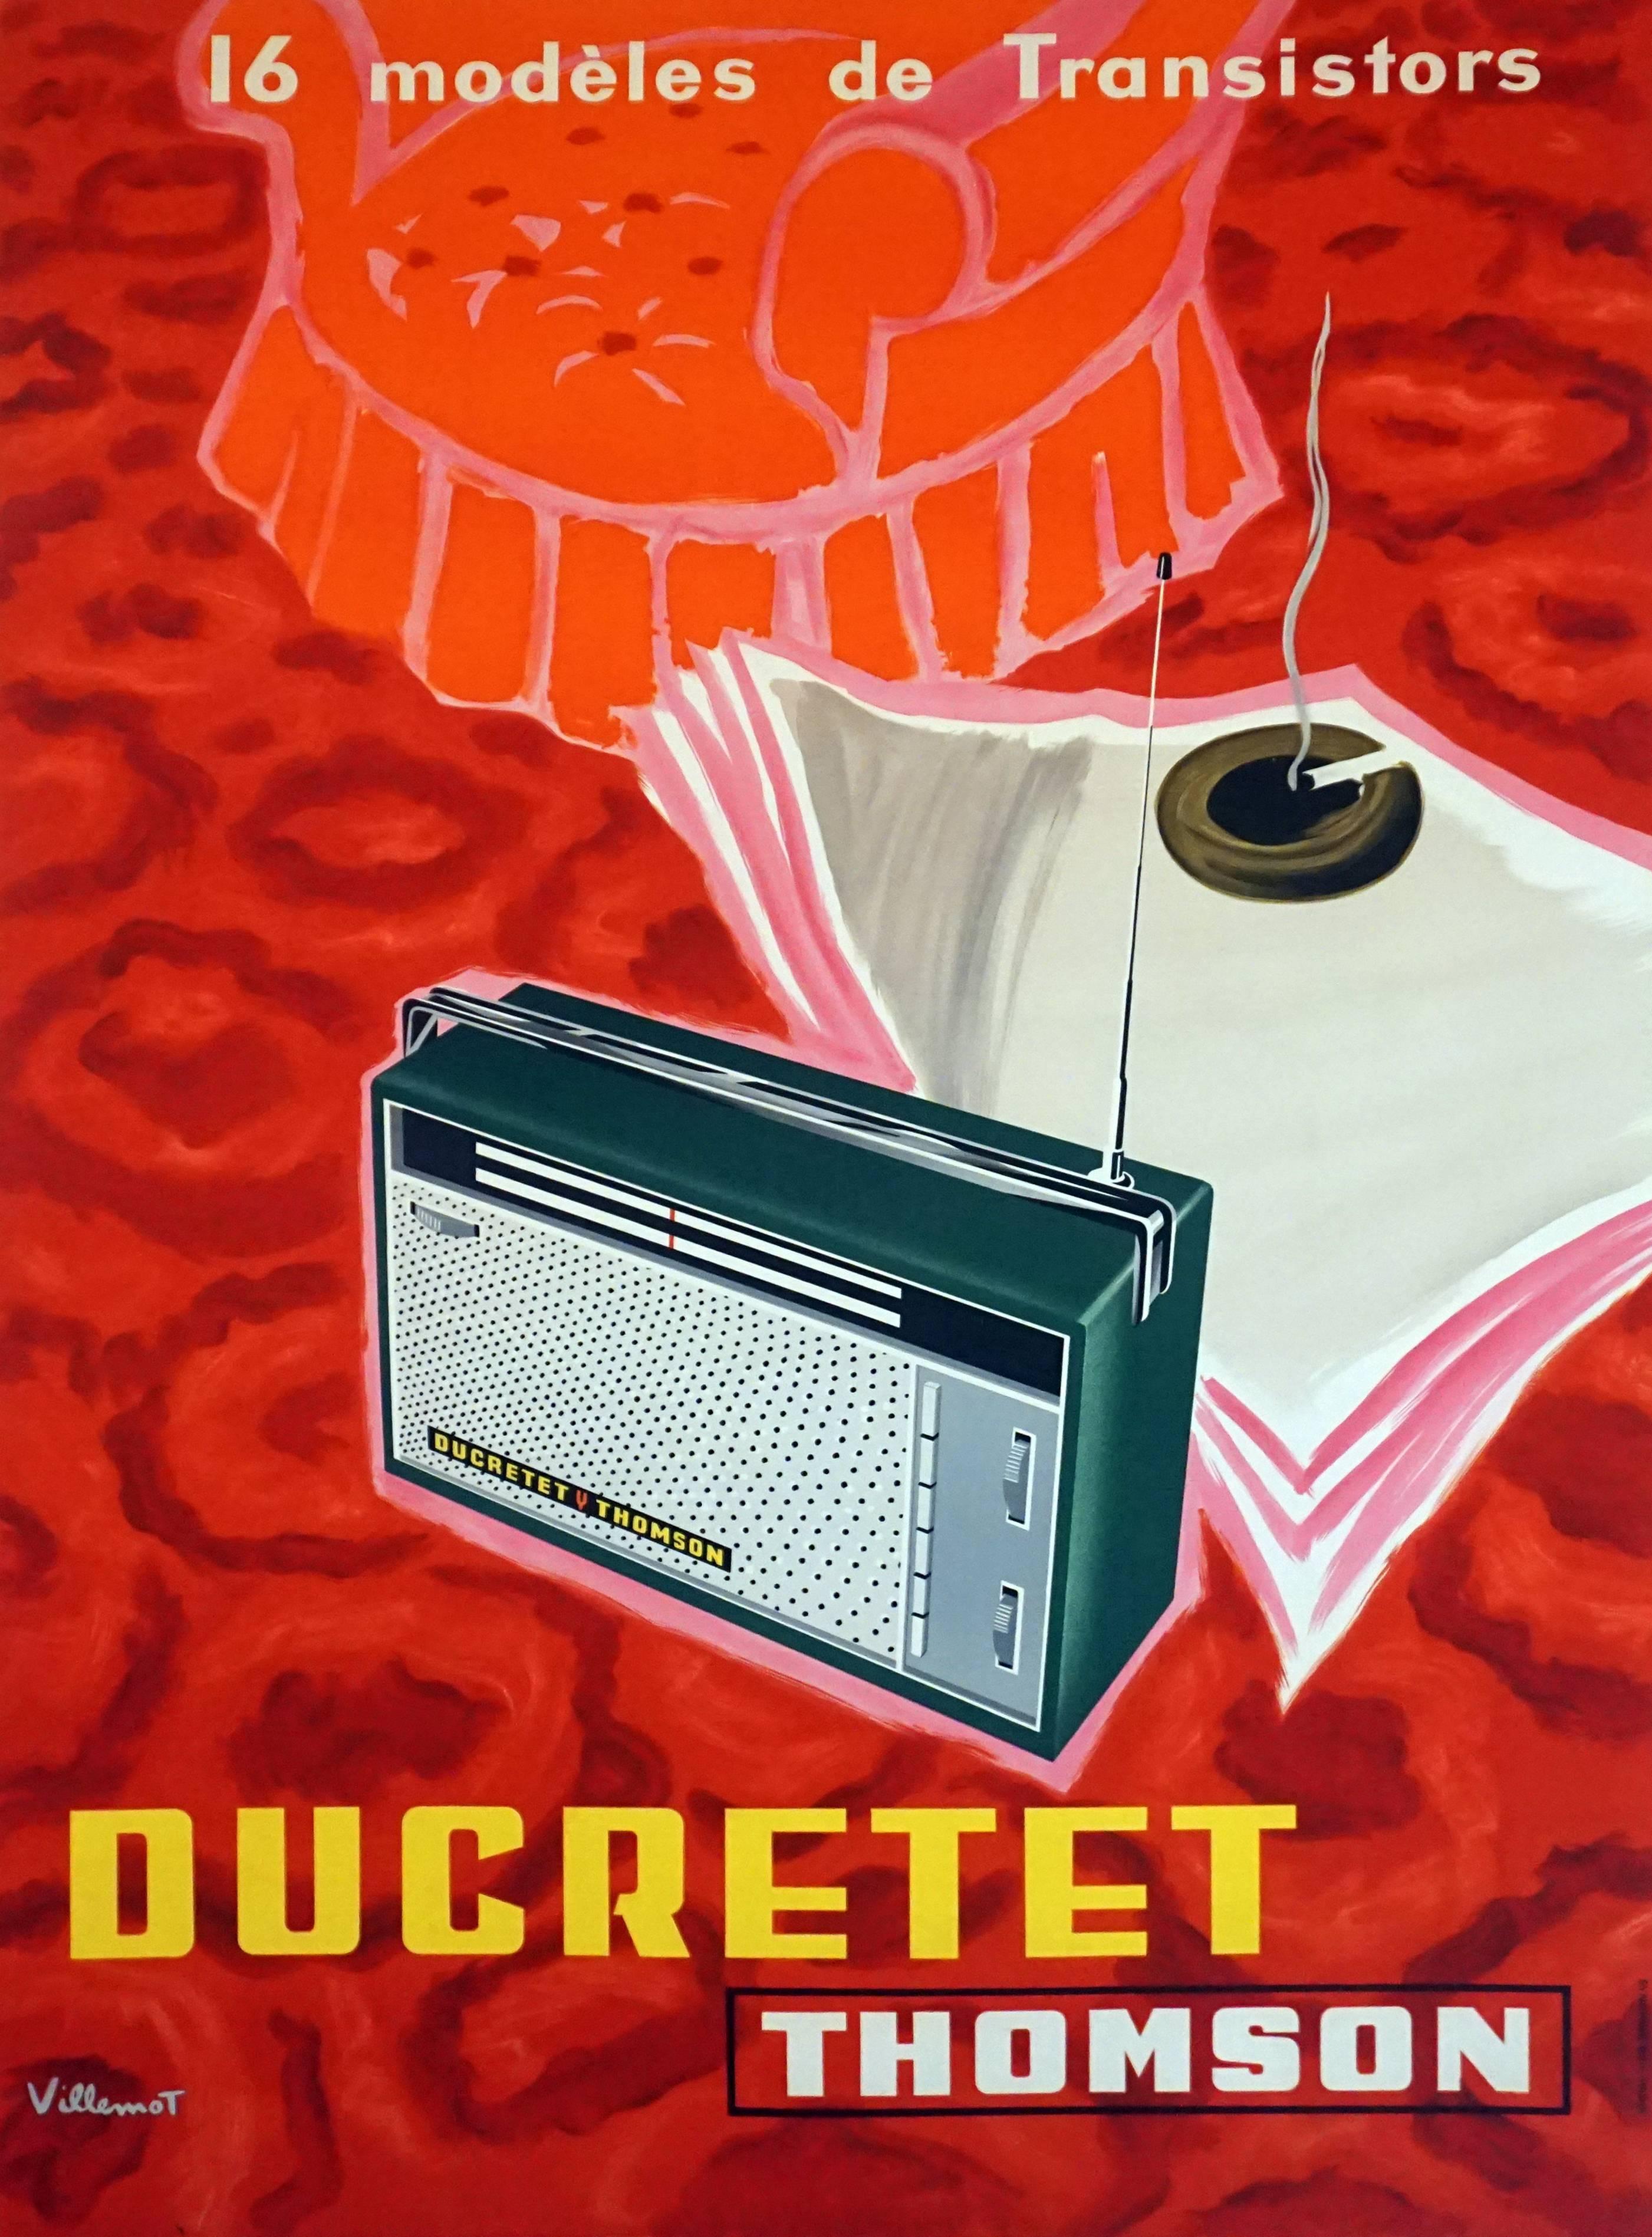 This midcentury original poster is for the transistor radio, advertising 